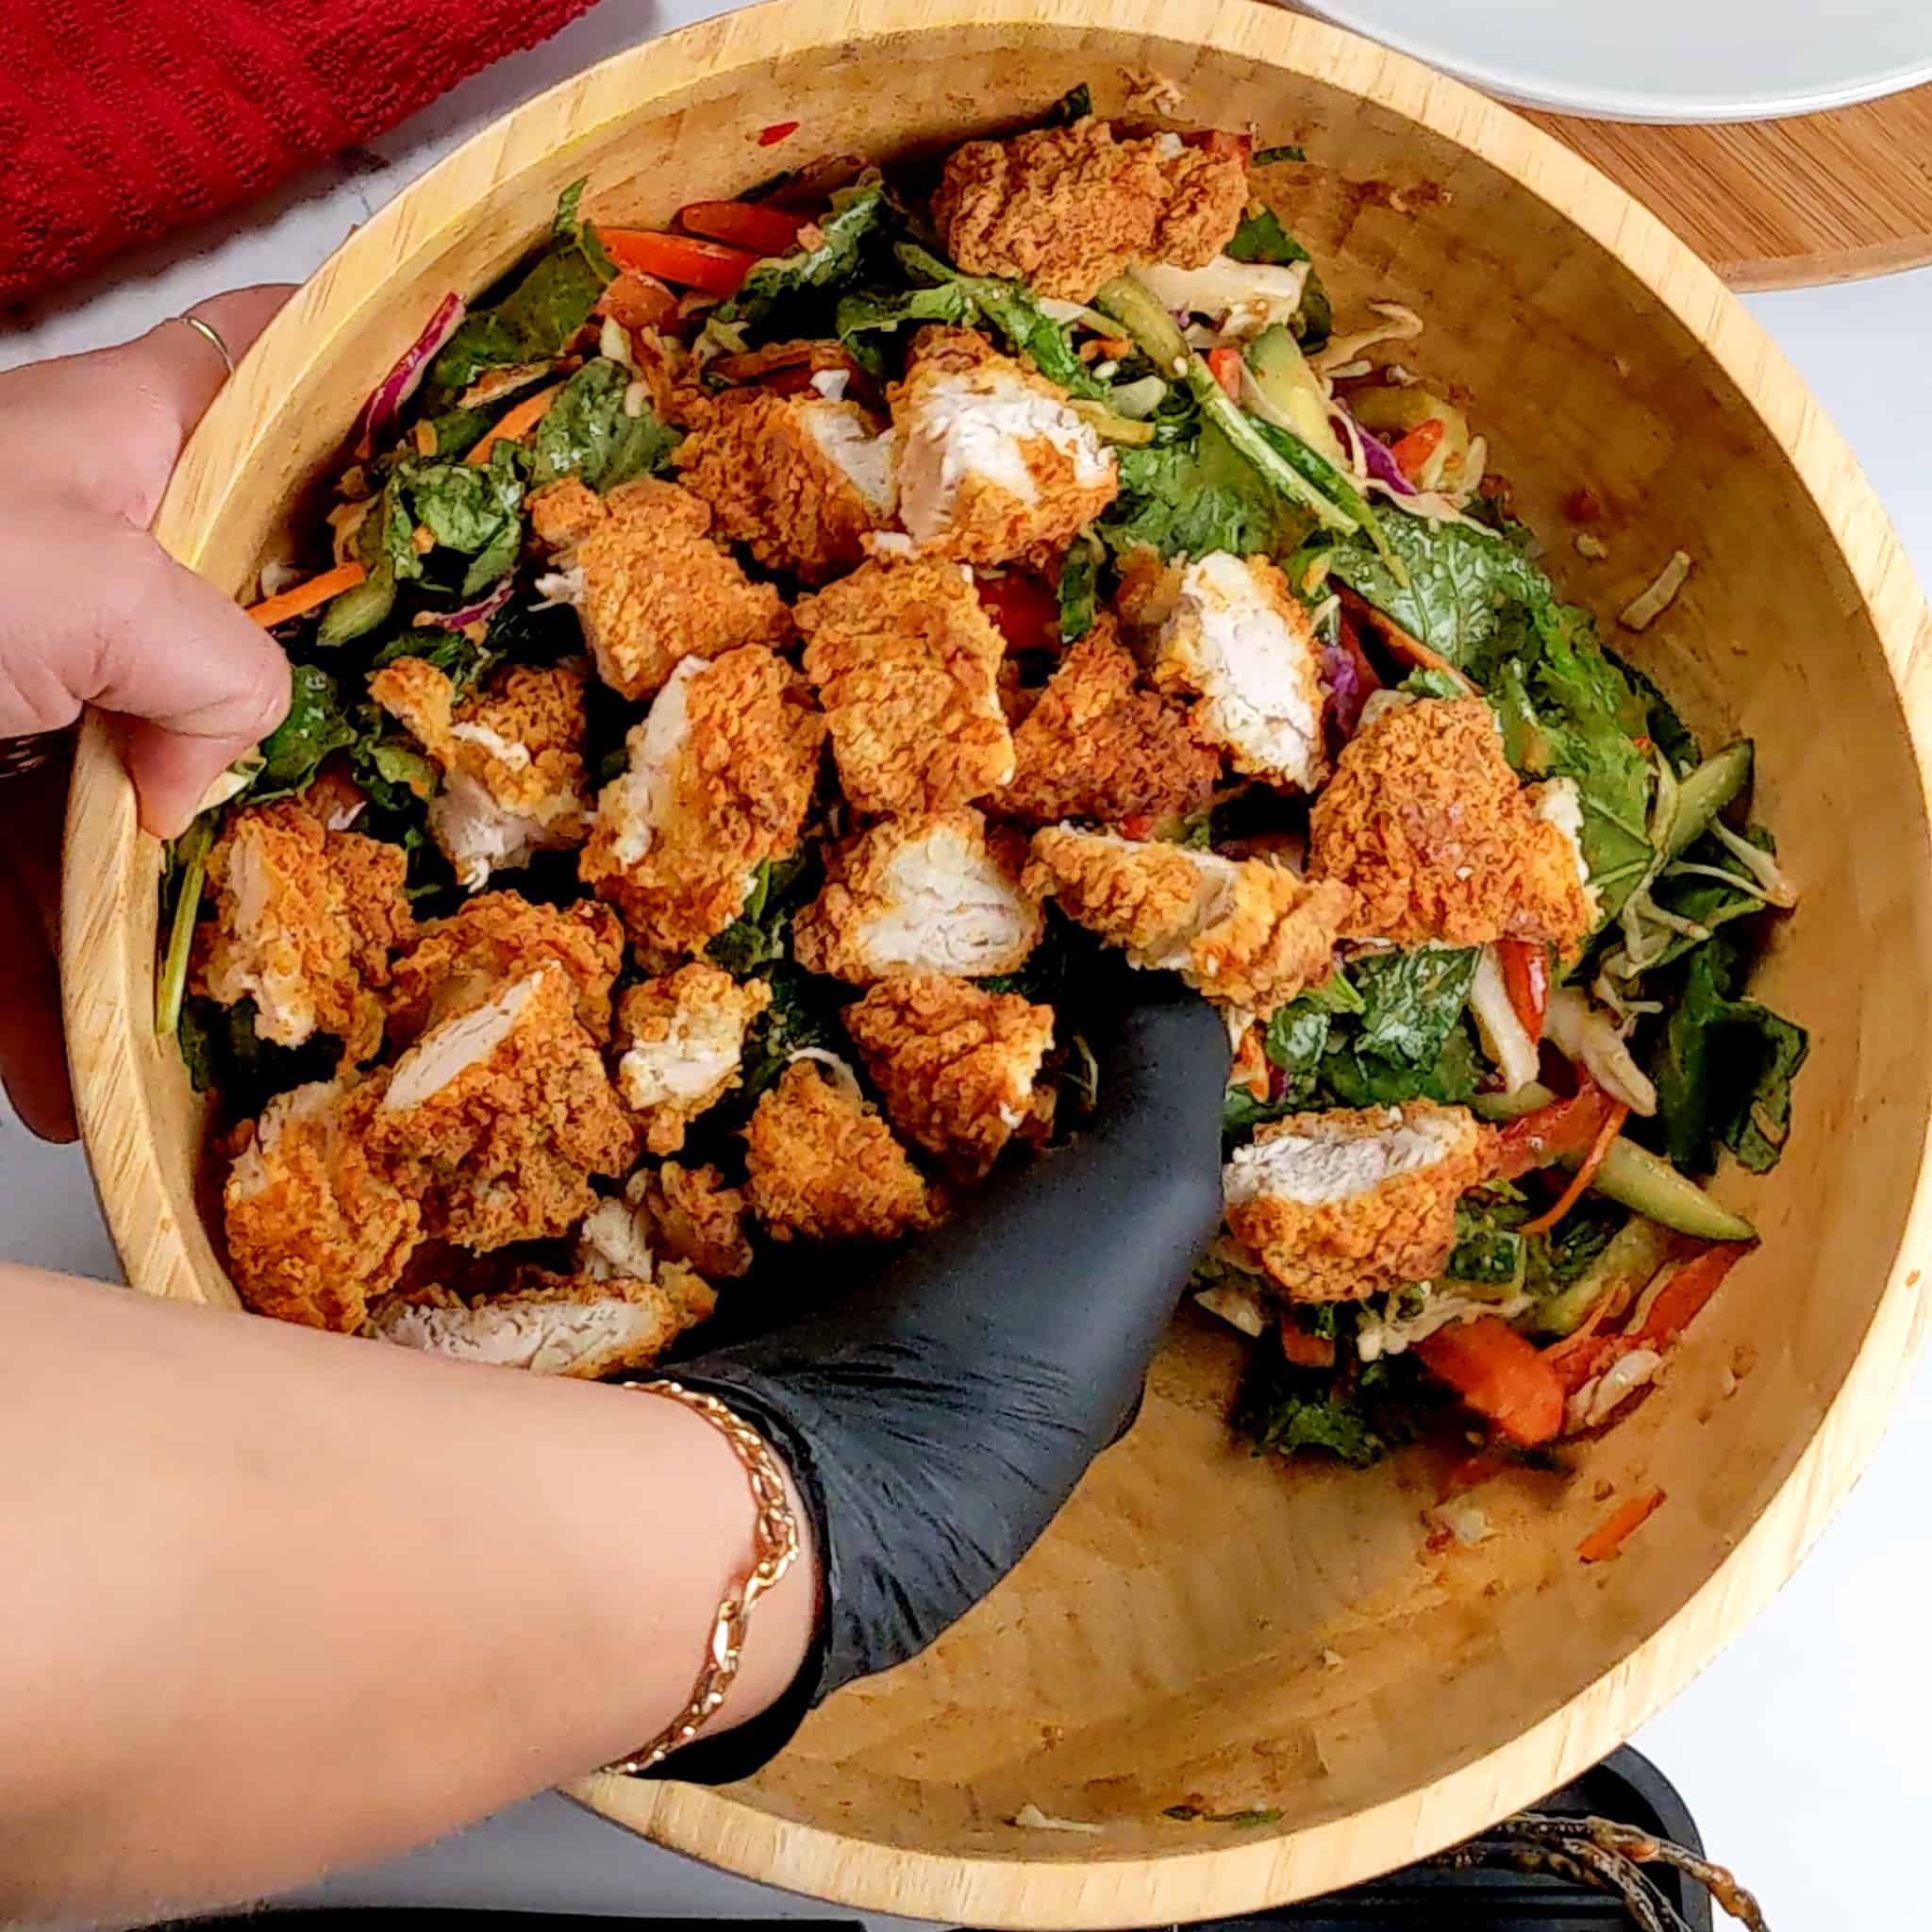 chopped chicken tenders being gently tossed into the salad by a gloved hand in a wooden bowl for the Sweet Chili Peanut Chicken Tenders Salad